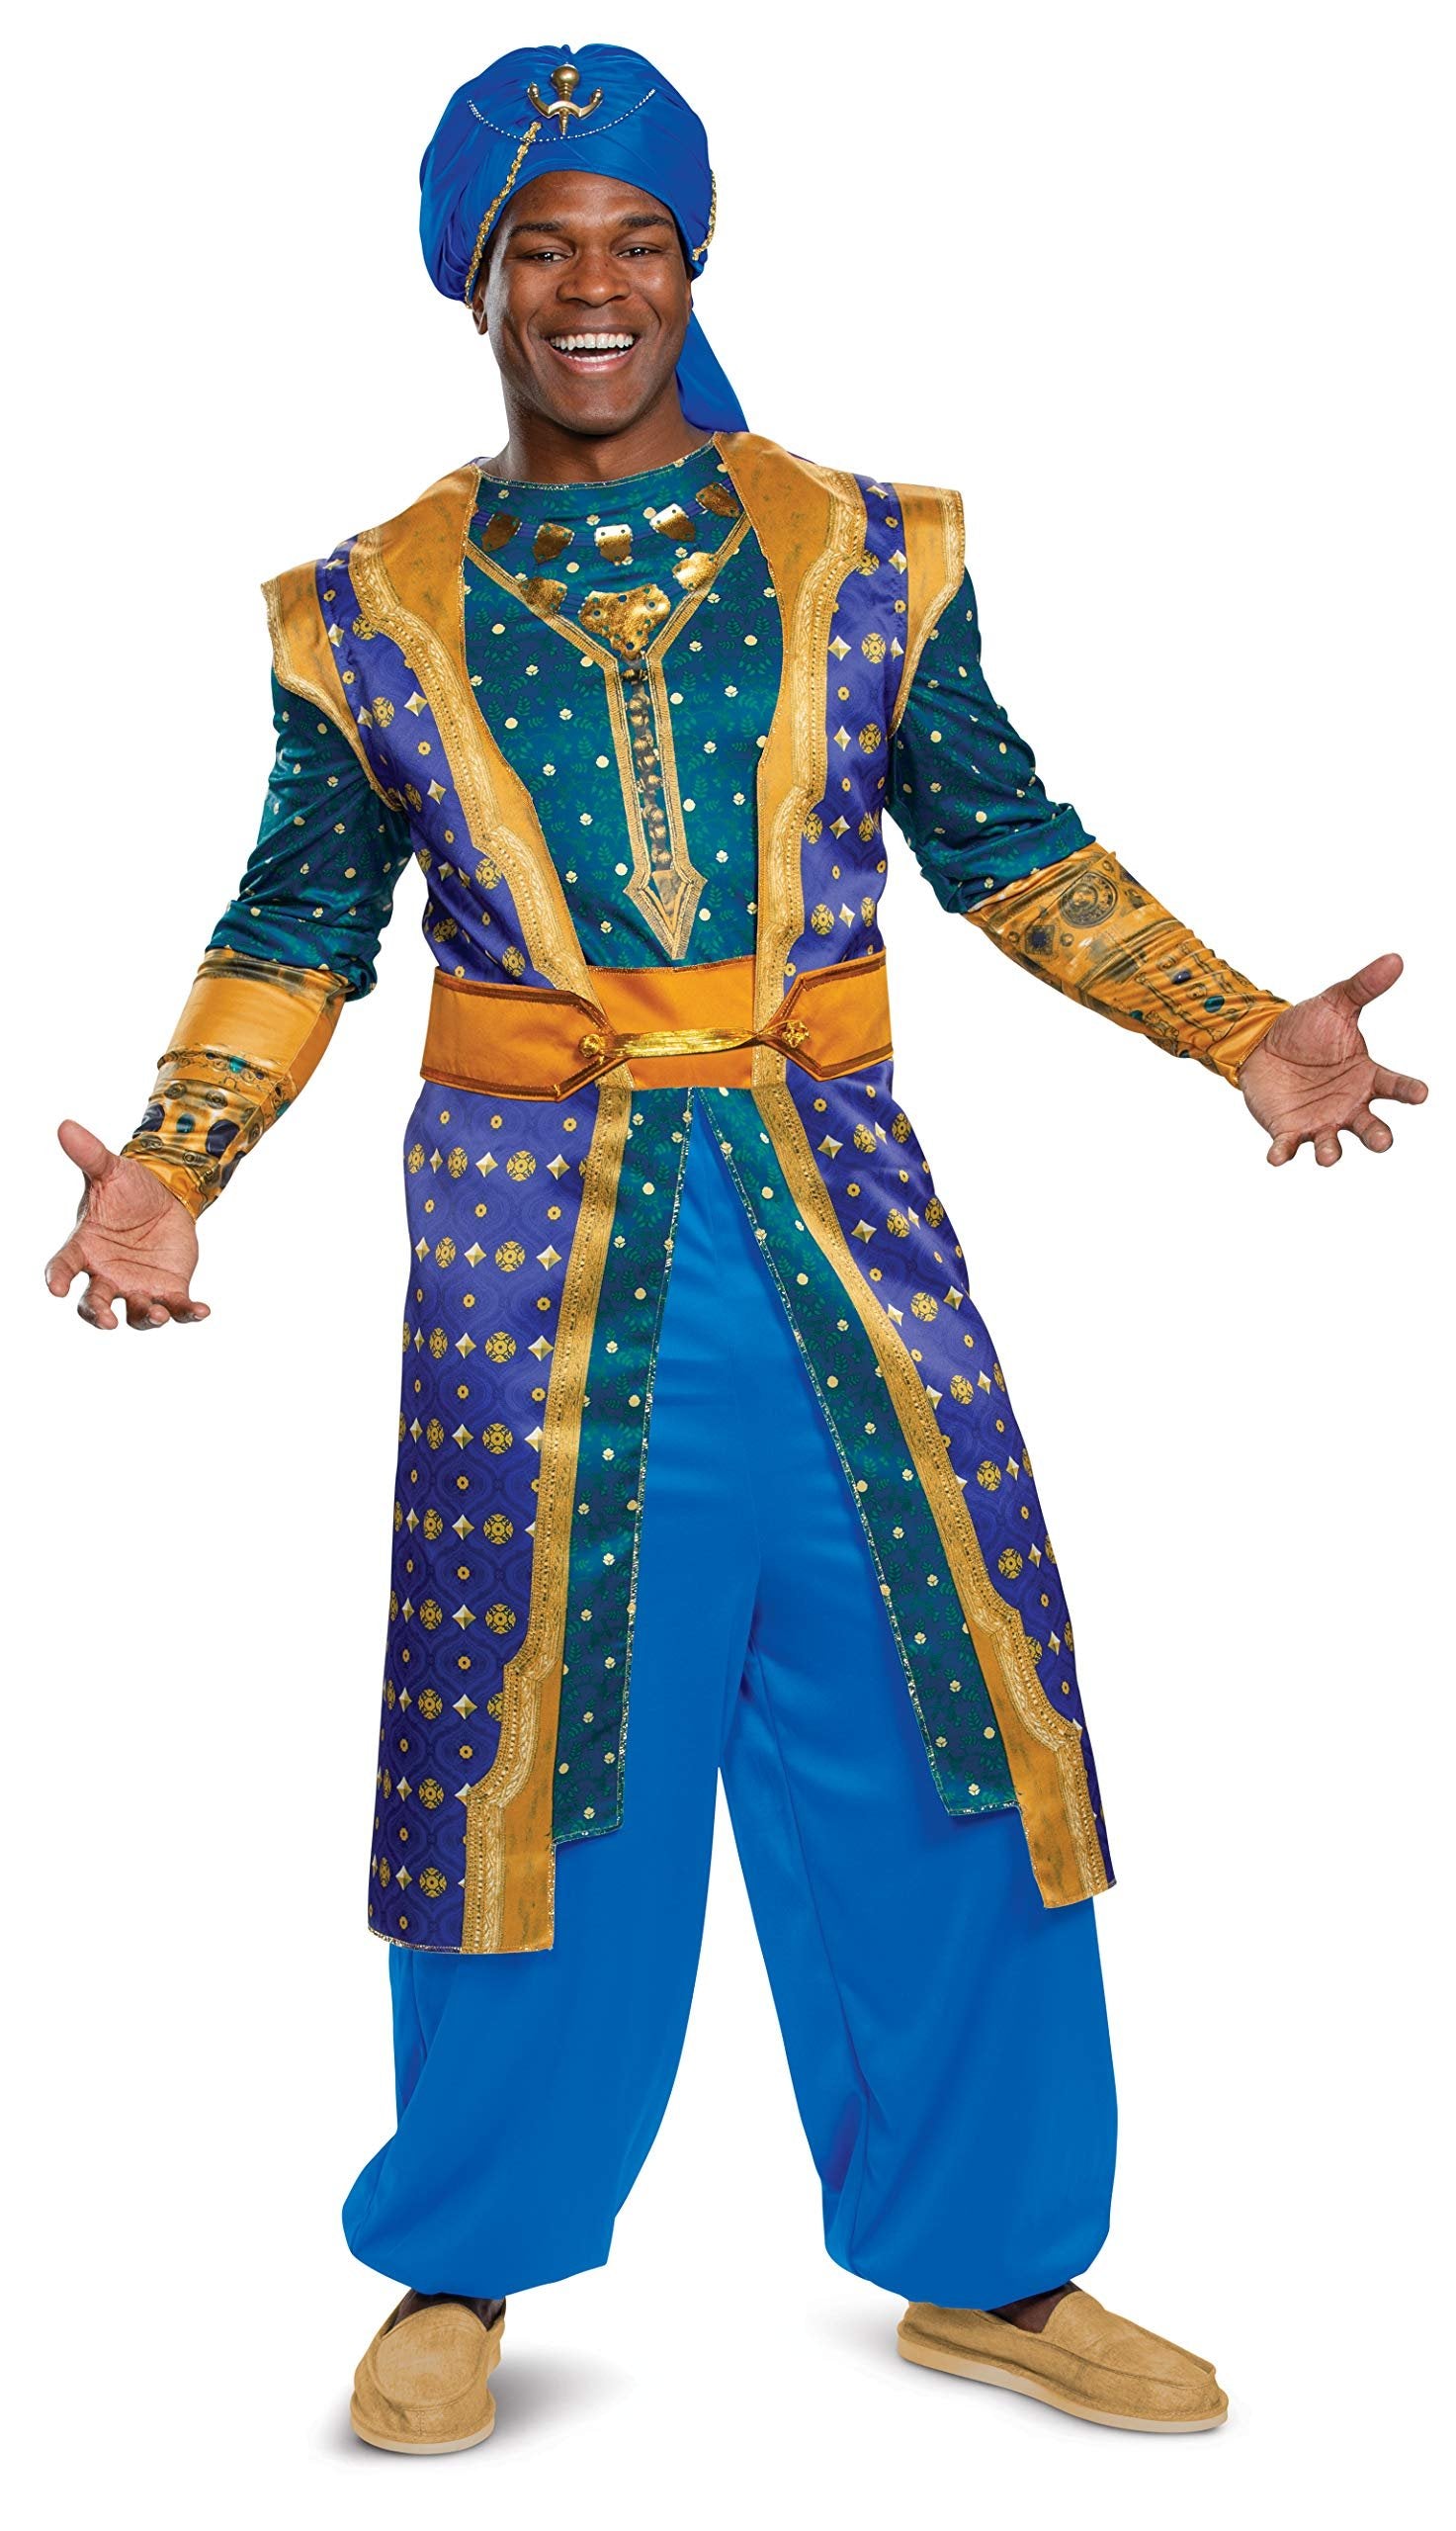 Disguise Men's Genie Deluxe Adult Costume, Blue, M (38-40)